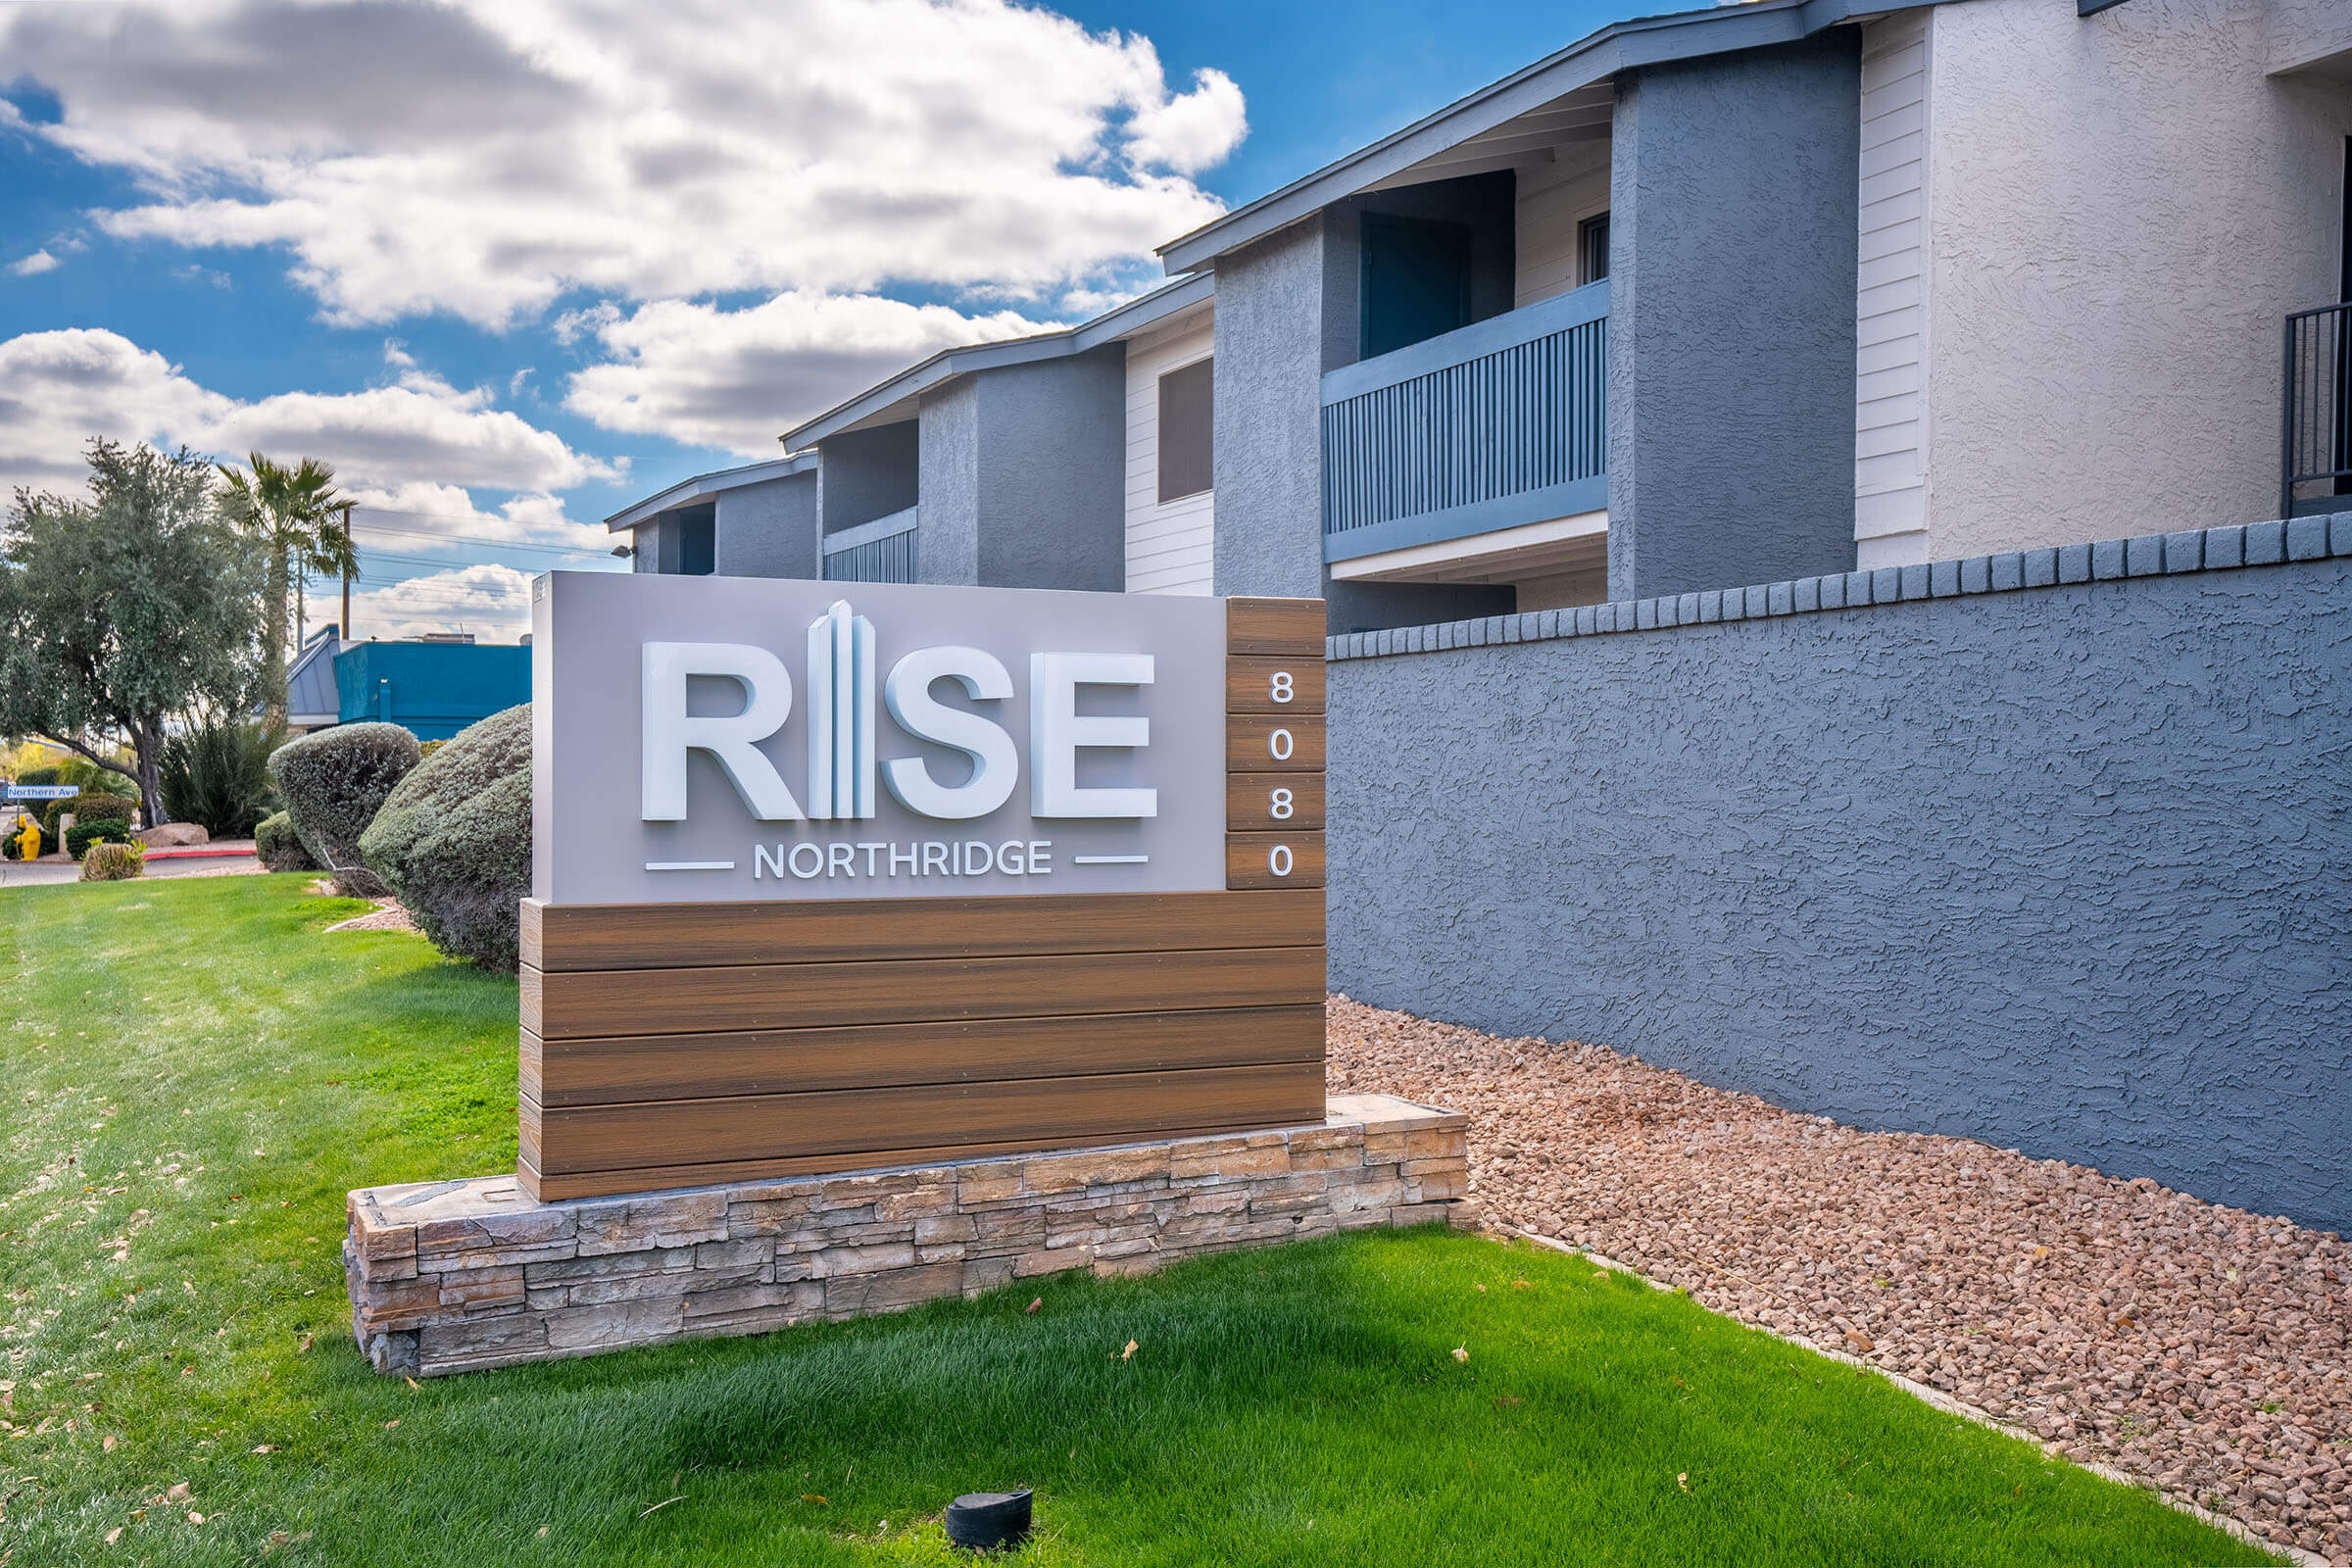 Rise North Ridge entrance signage with apartments behind it.